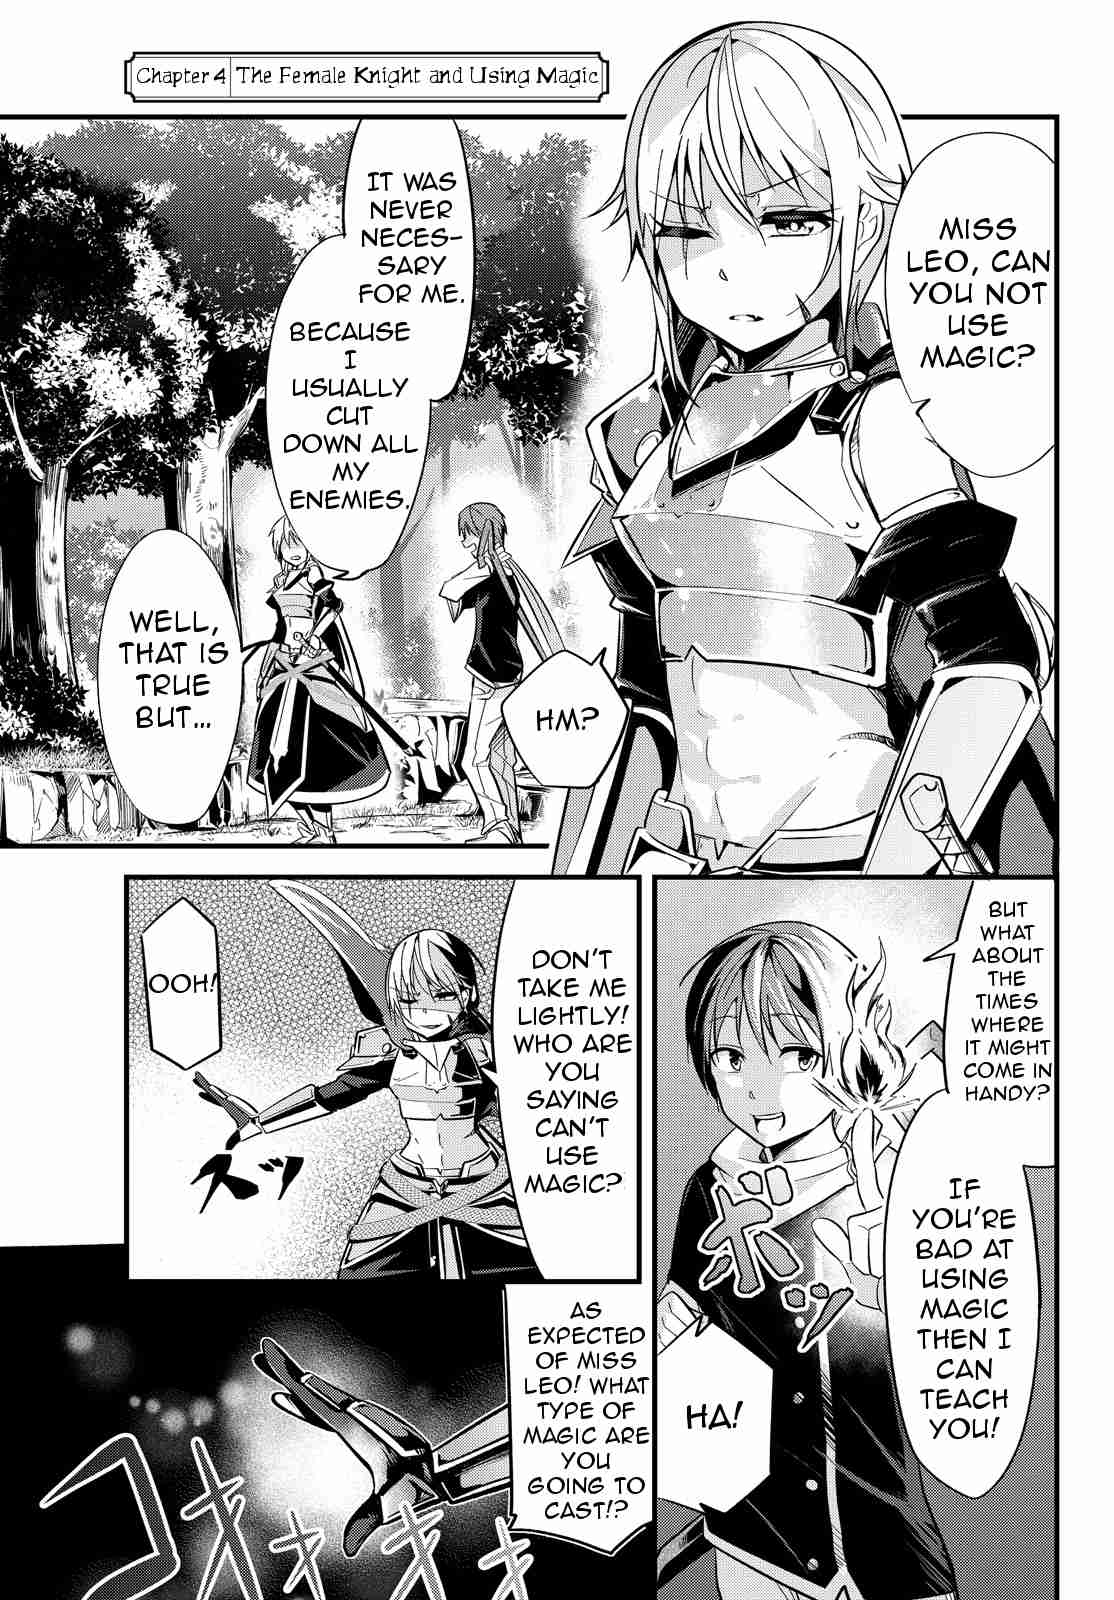 A Story About Treating a Female Knight, Who Has Never Been Treated as a Woman, as a Woman Ch. 4 The Female Knight and Using Magic